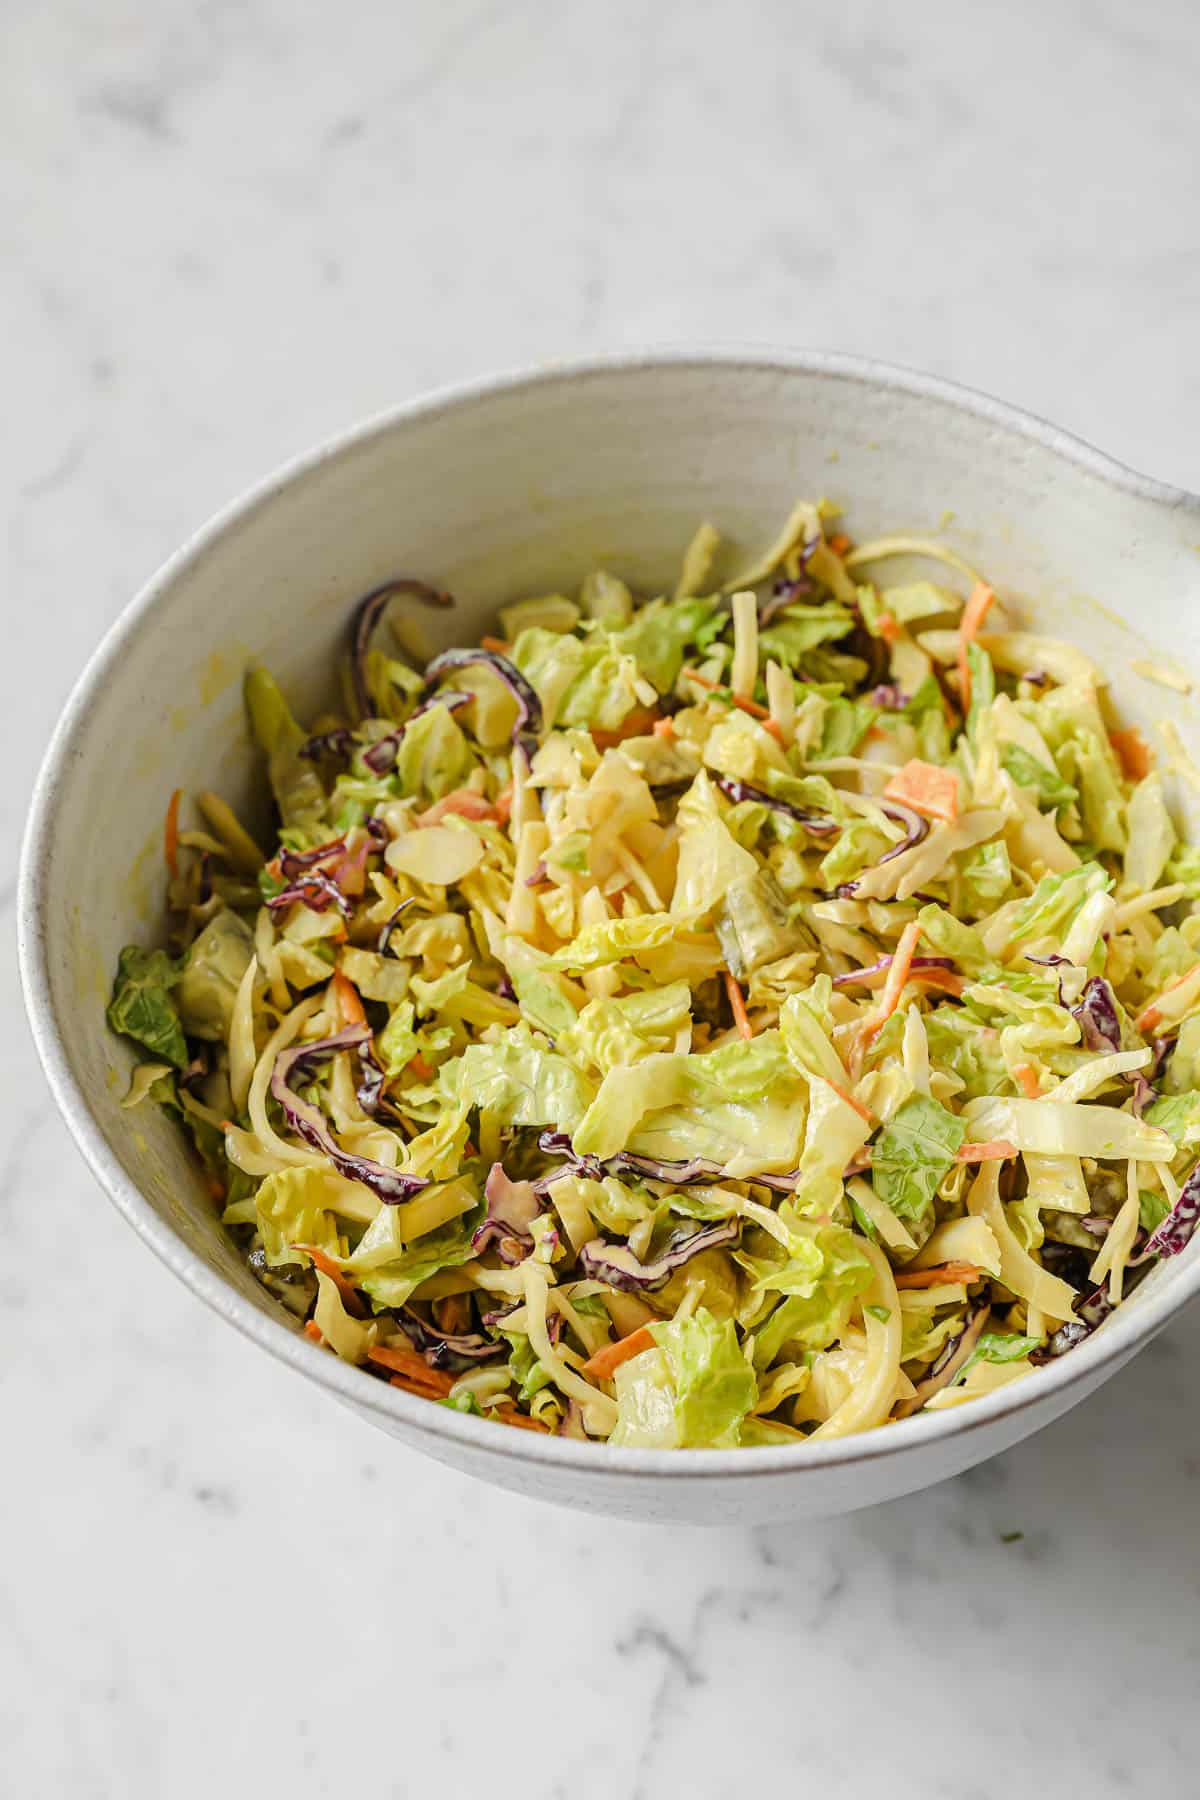 fresh chopped lettuce and coleslaw mix being tossed in homemade sweet mustard dressing